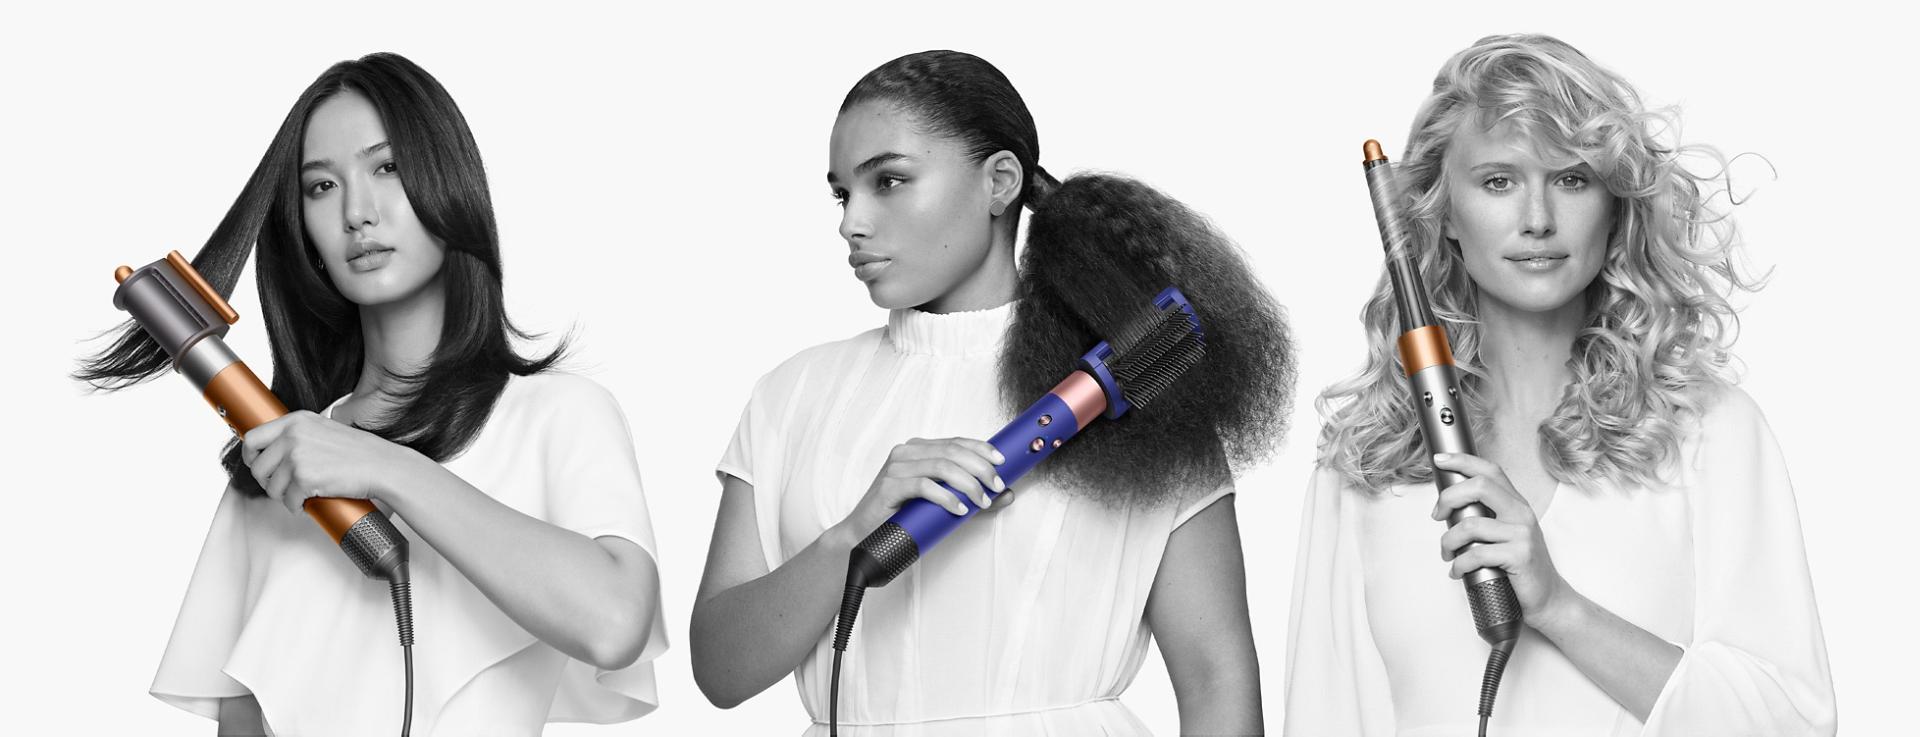 Models holding a Dyson Airwrap multi-styler with various attachments.